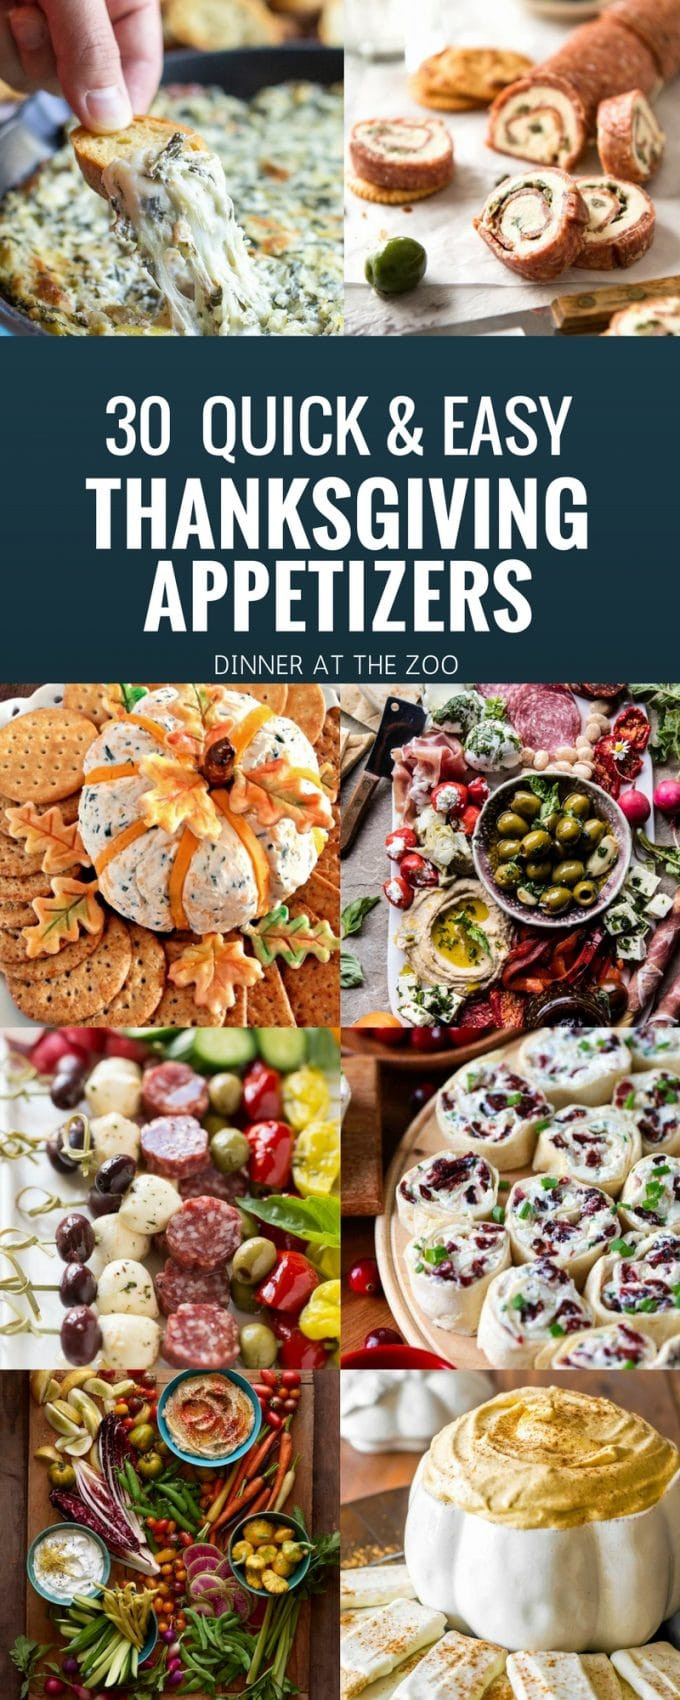 Easy Thanksgiving Appetizers Ideas
 30 Thanksgiving Appetizer Recipes Dinner at the Zoo